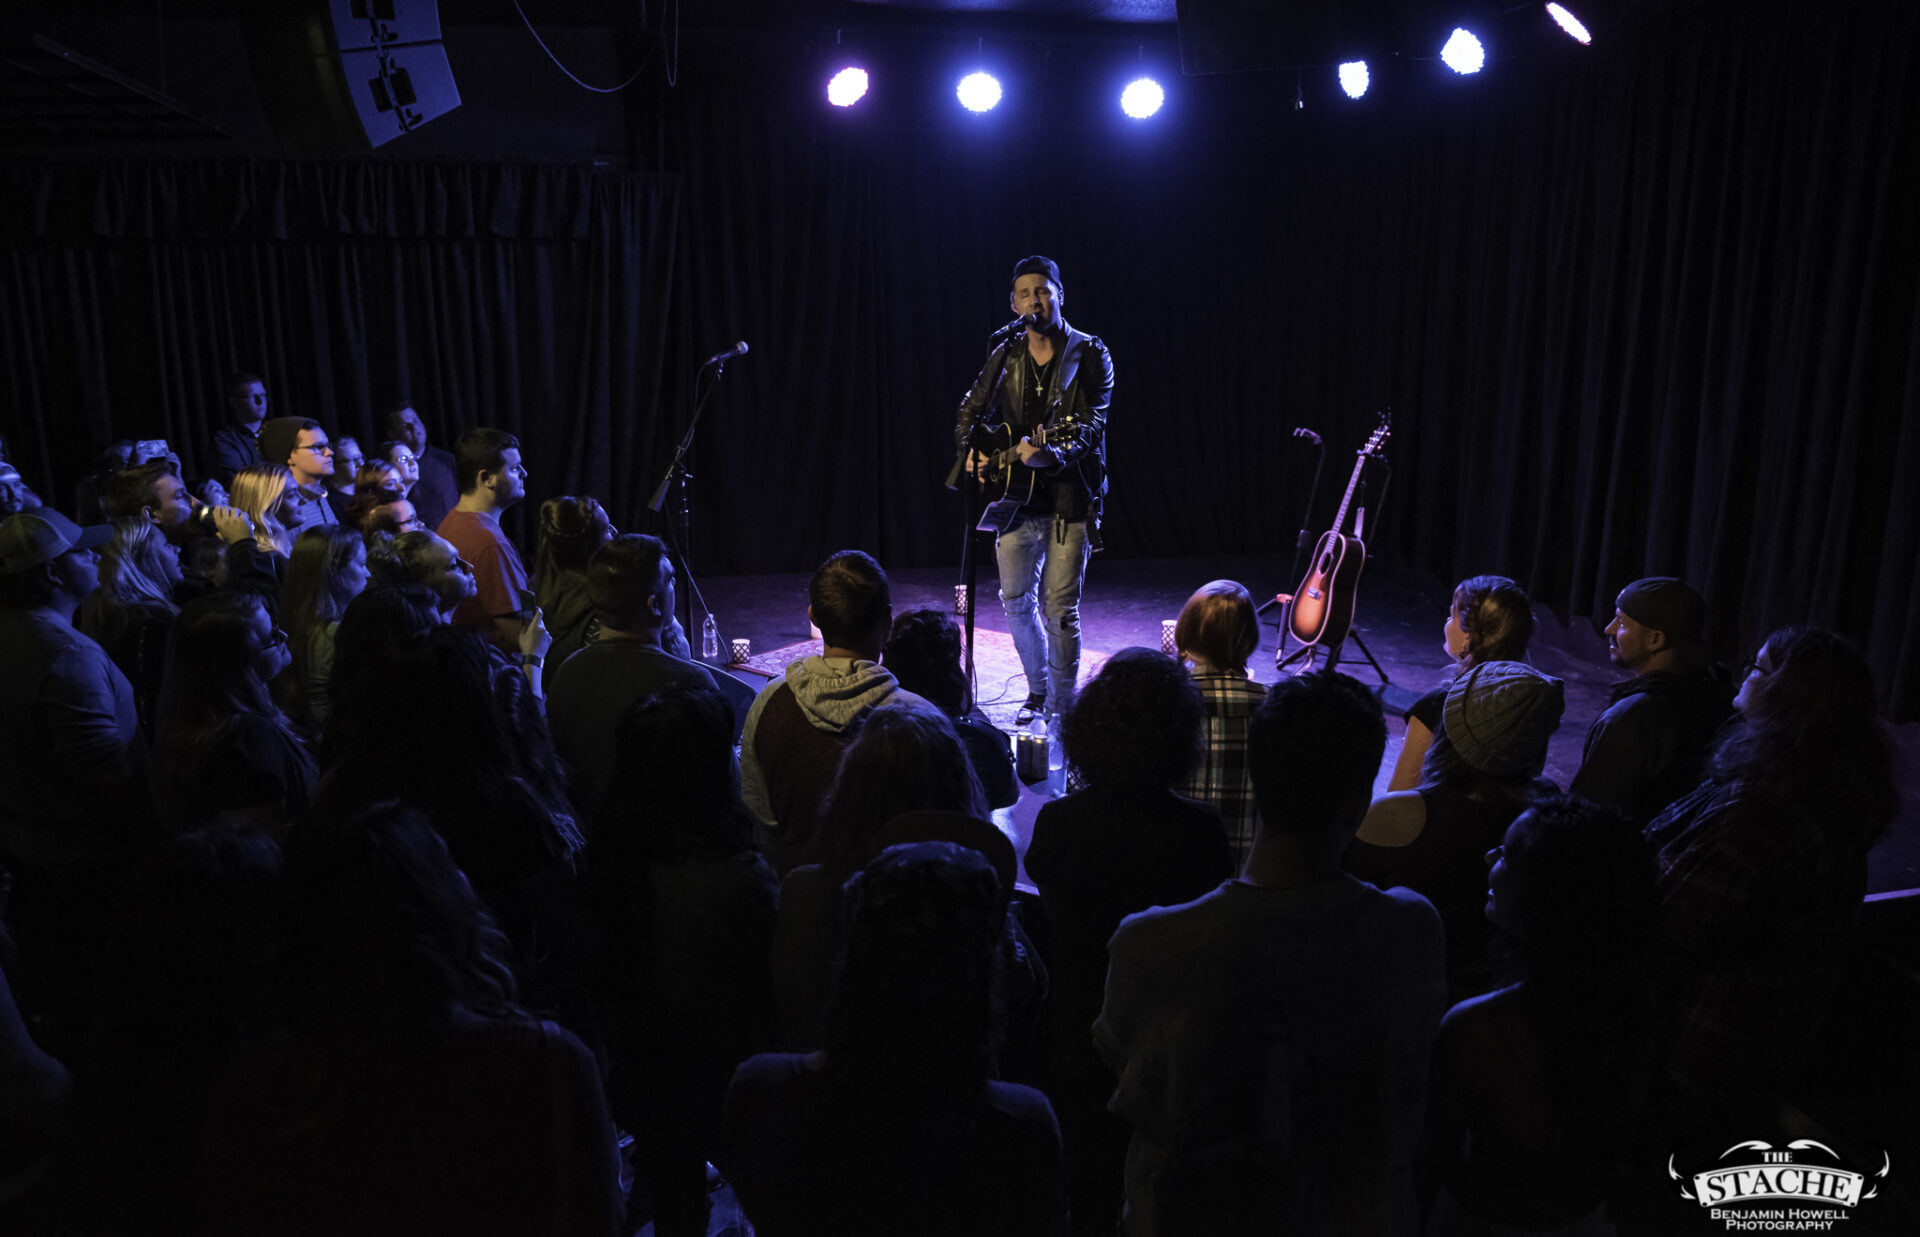 LIVE REVIEW: Secondhand Serenade celebrates 10 years of ‘Awake’